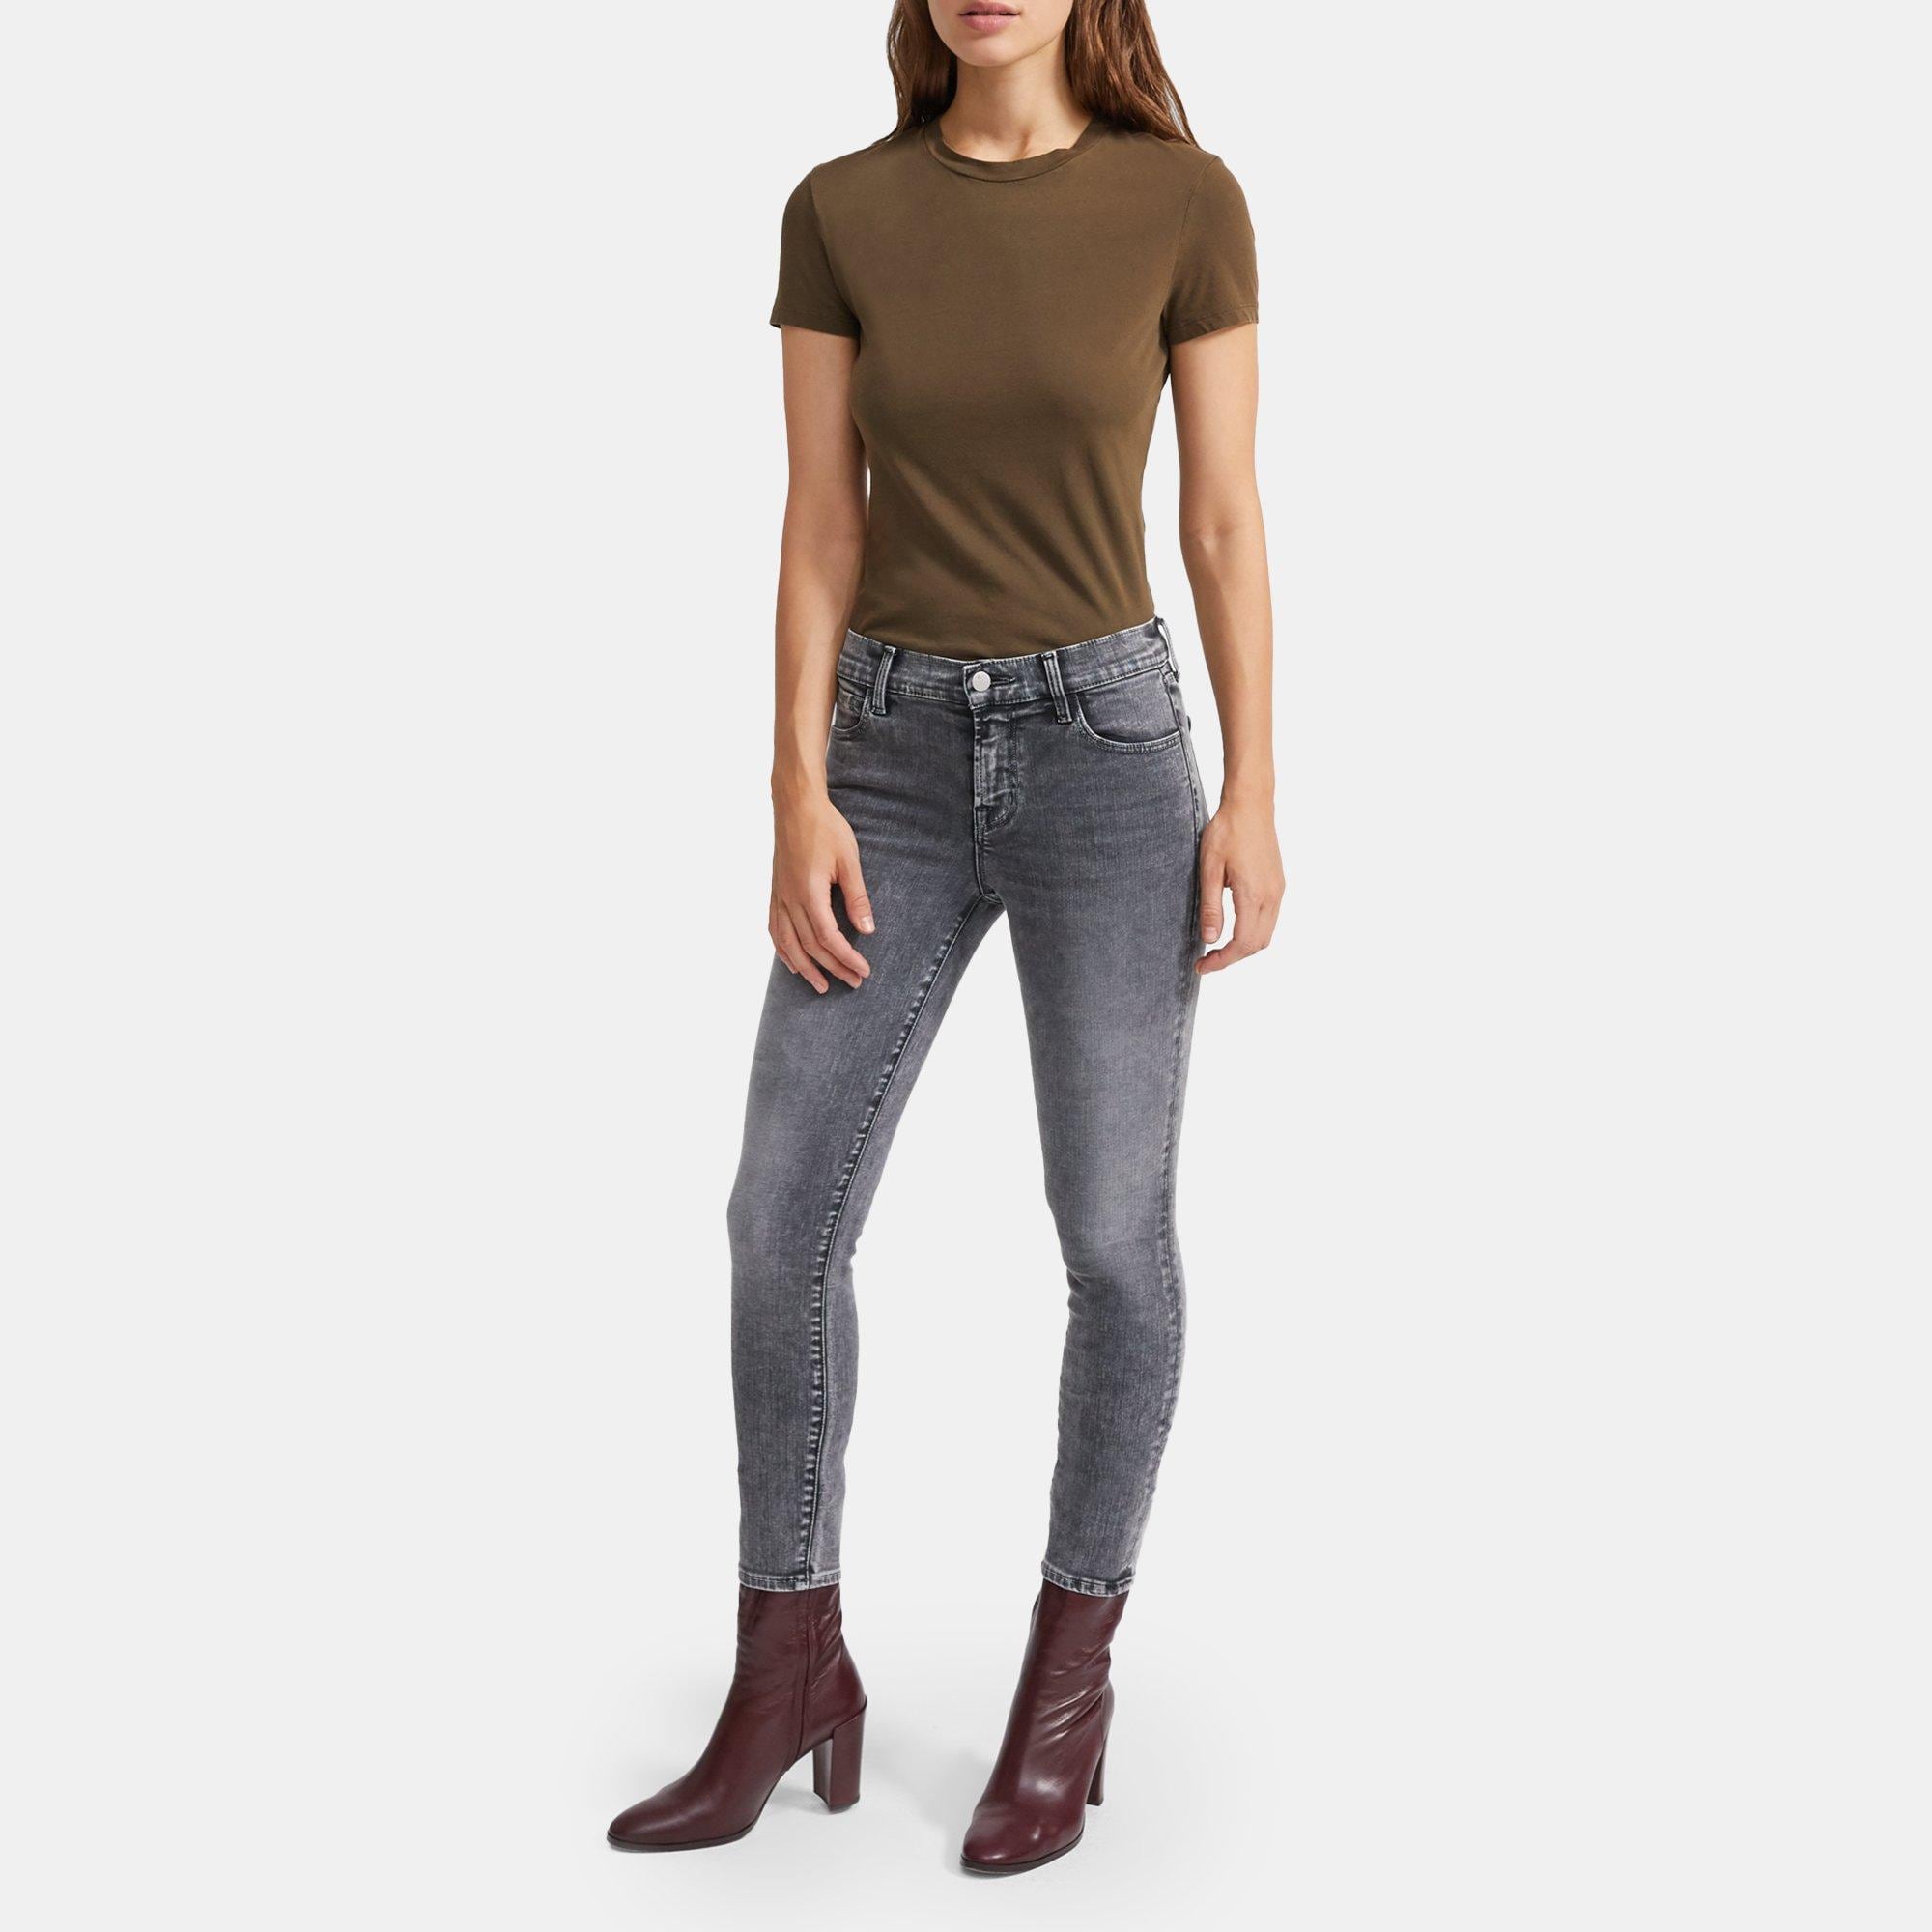 J Brand 835 Mid Rise Capri Jean in Collision – Order Of Style